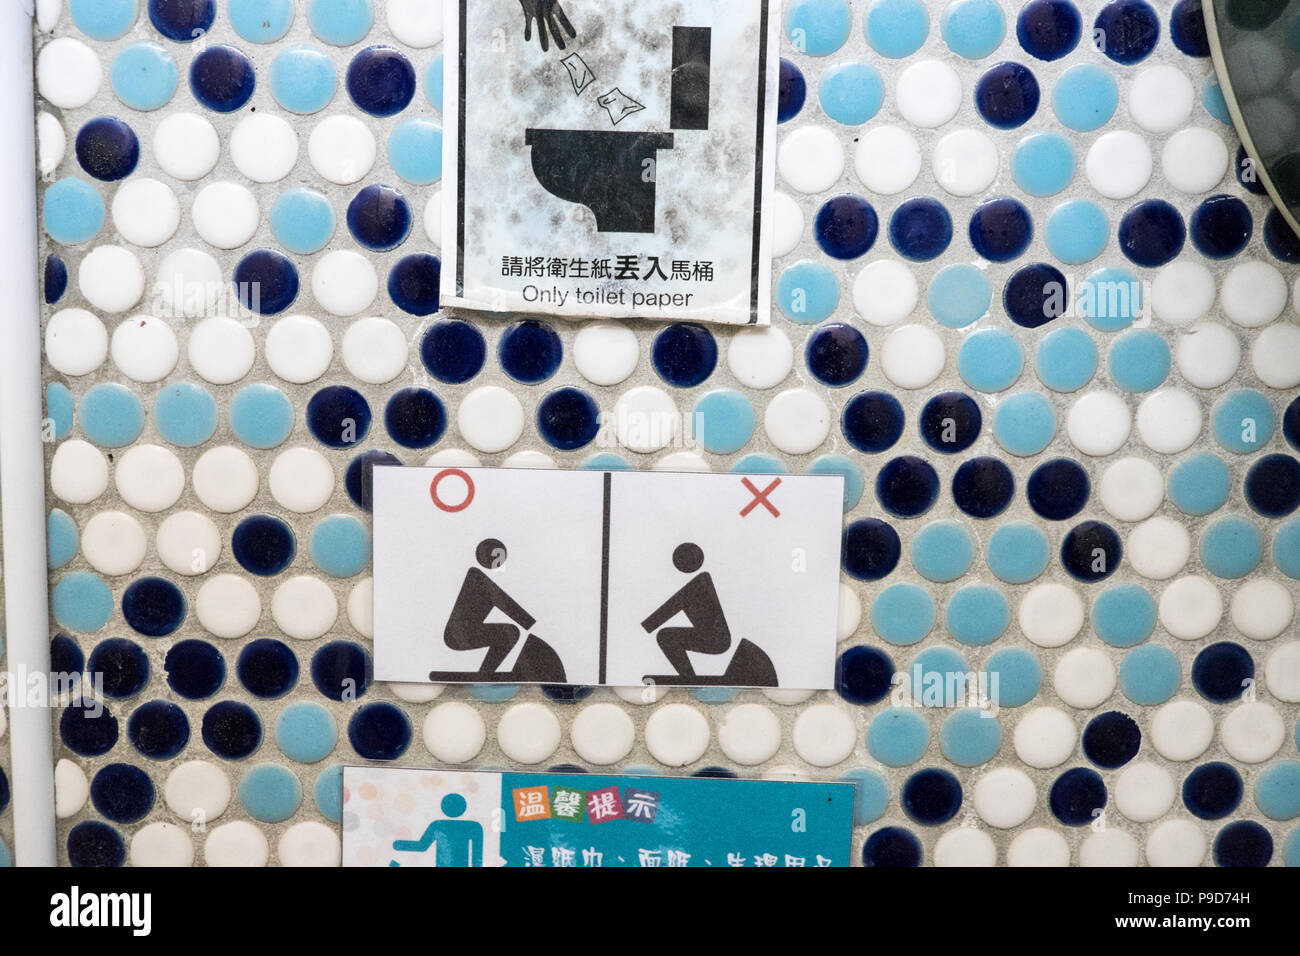 Toilet,sign,how,to,squat,information,at,public,toilet,Guanshan,train,station,south,of,Taipei,Taiwan,China,Chinese,Republic of China,ROC,Asia,Asian, Stock Photo